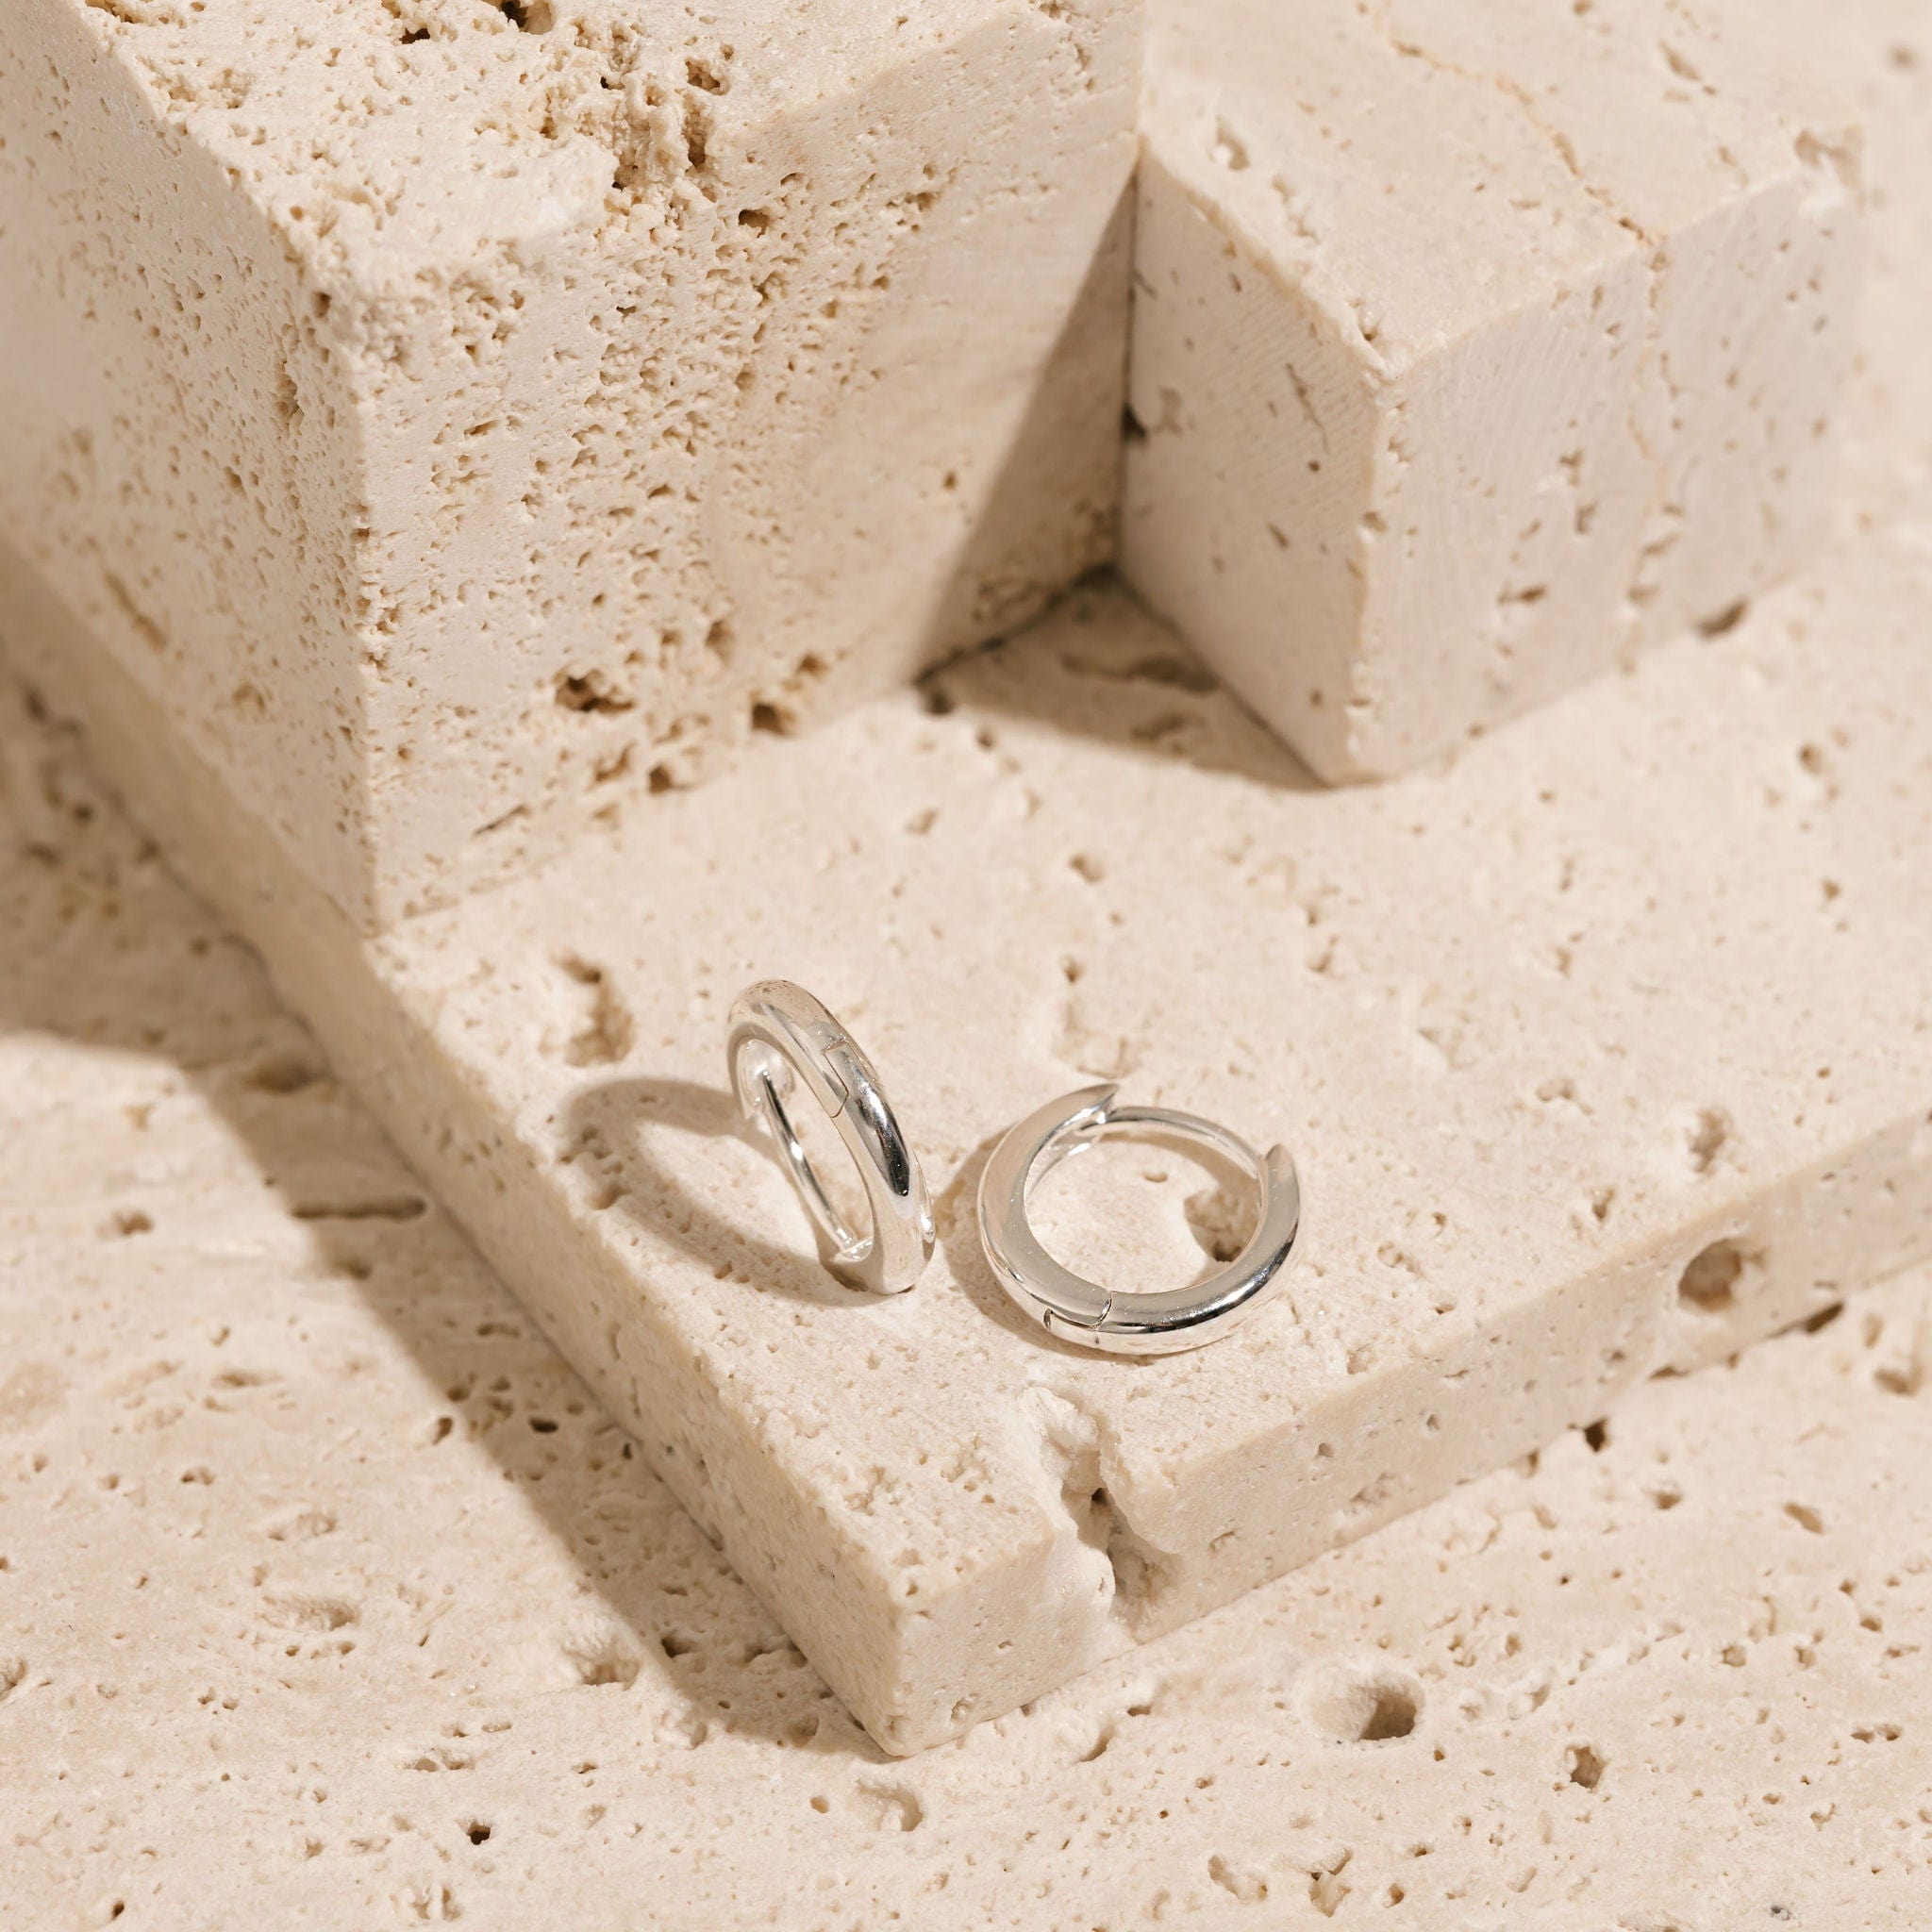 A pair of sterling silver Ravello Huggie earrings is displayed side-by-side on a tiered stone surface, one earring using the porous surface to balance on its clasp closure while the other lays flat on its side. 